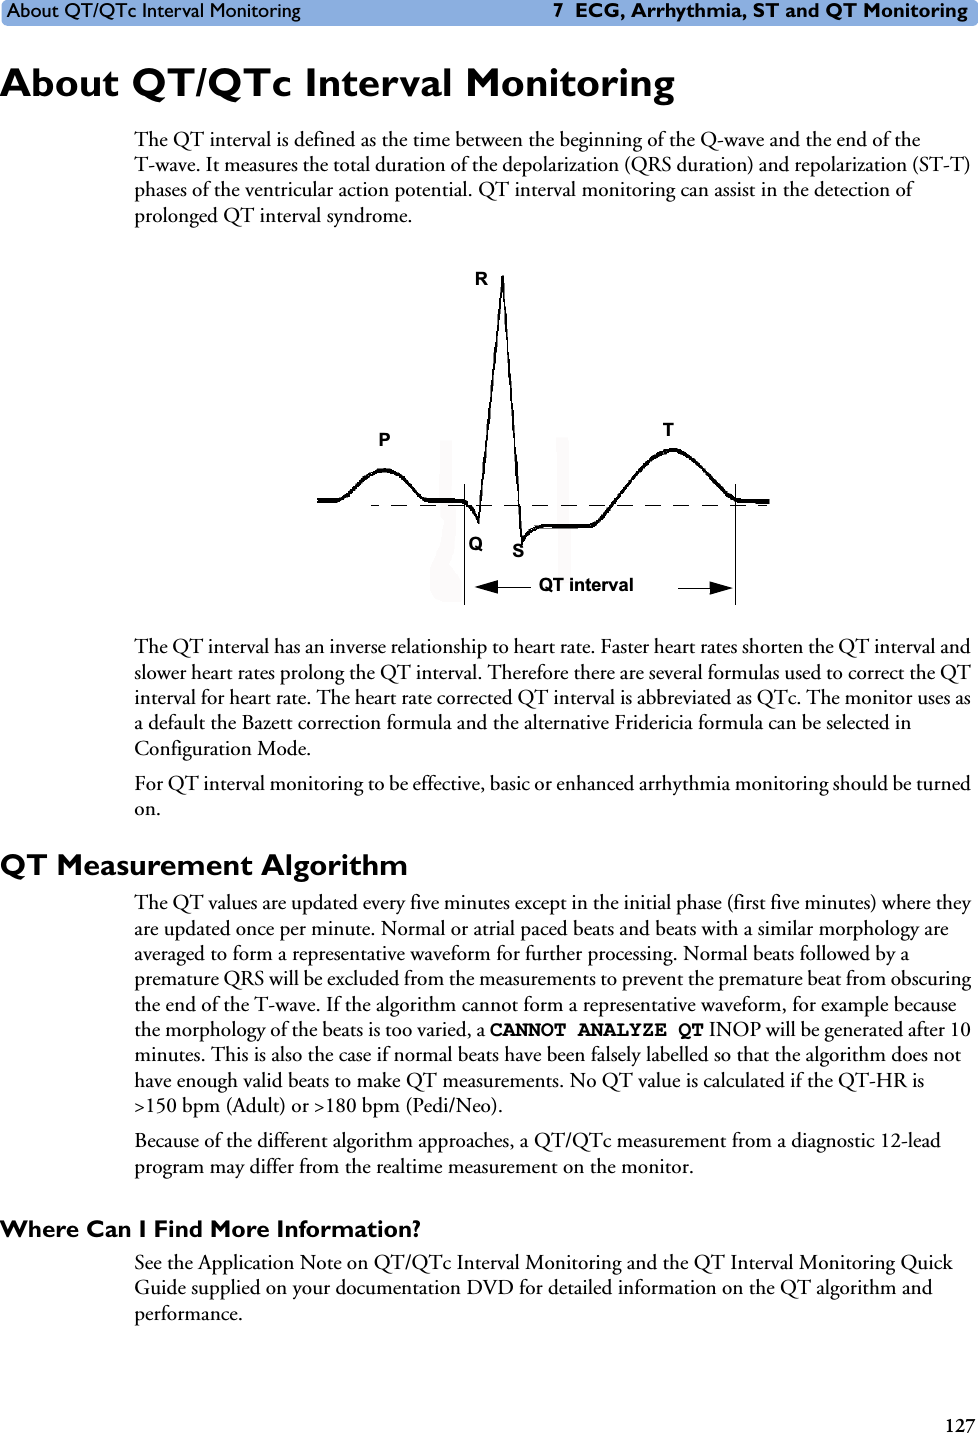 About QT/QTc Interval Monitoring 7 ECG, Arrhythmia, ST and QT Monitoring127About QT/QTc Interval MonitoringThe QT interval is defined as the time between the beginning of the Q-wave and the end of the T-wave. It measures the total duration of the depolarization (QRS duration) and repolarization (ST-T) phases of the ventricular action potential. QT interval monitoring can assist in the detection of prolonged QT interval syndrome. The QT interval has an inverse relationship to heart rate. Faster heart rates shorten the QT interval and slower heart rates prolong the QT interval. Therefore there are several formulas used to correct the QT interval for heart rate. The heart rate corrected QT interval is abbreviated as QTc. The monitor uses as a default the Bazett correction formula and the alternative Fridericia formula can be selected in Configuration Mode. For QT interval monitoring to be effective, basic or enhanced arrhythmia monitoring should be turned on. QT Measurement AlgorithmThe QT values are updated every five minutes except in the initial phase (first five minutes) where they are updated once per minute. Normal or atrial paced beats and beats with a similar morphology are averaged to form a representative waveform for further processing. Normal beats followed by a premature QRS will be excluded from the measurements to prevent the premature beat from obscuring the end of the T-wave. If the algorithm cannot form a representative waveform, for example because the morphology of the beats is too varied, a CANNOT ANALYZE QT INOP will be generated after 10 minutes. This is also the case if normal beats have been falsely labelled so that the algorithm does not have enough valid beats to make QT measurements. No QT value is calculated if the QT-HR is &gt;150 bpm (Adult) or &gt;180 bpm (Pedi/Neo).Because of the different algorithm approaches, a QT/QTc measurement from a diagnostic 12-lead program may differ from the realtime measurement on the monitor. Where Can I Find More Information? See the Application Note on QT/QTc Interval Monitoring and the QT Interval Monitoring Quick Guide supplied on your documentation DVD for detailed information on the QT algorithm and performance.TQSPRQT interval